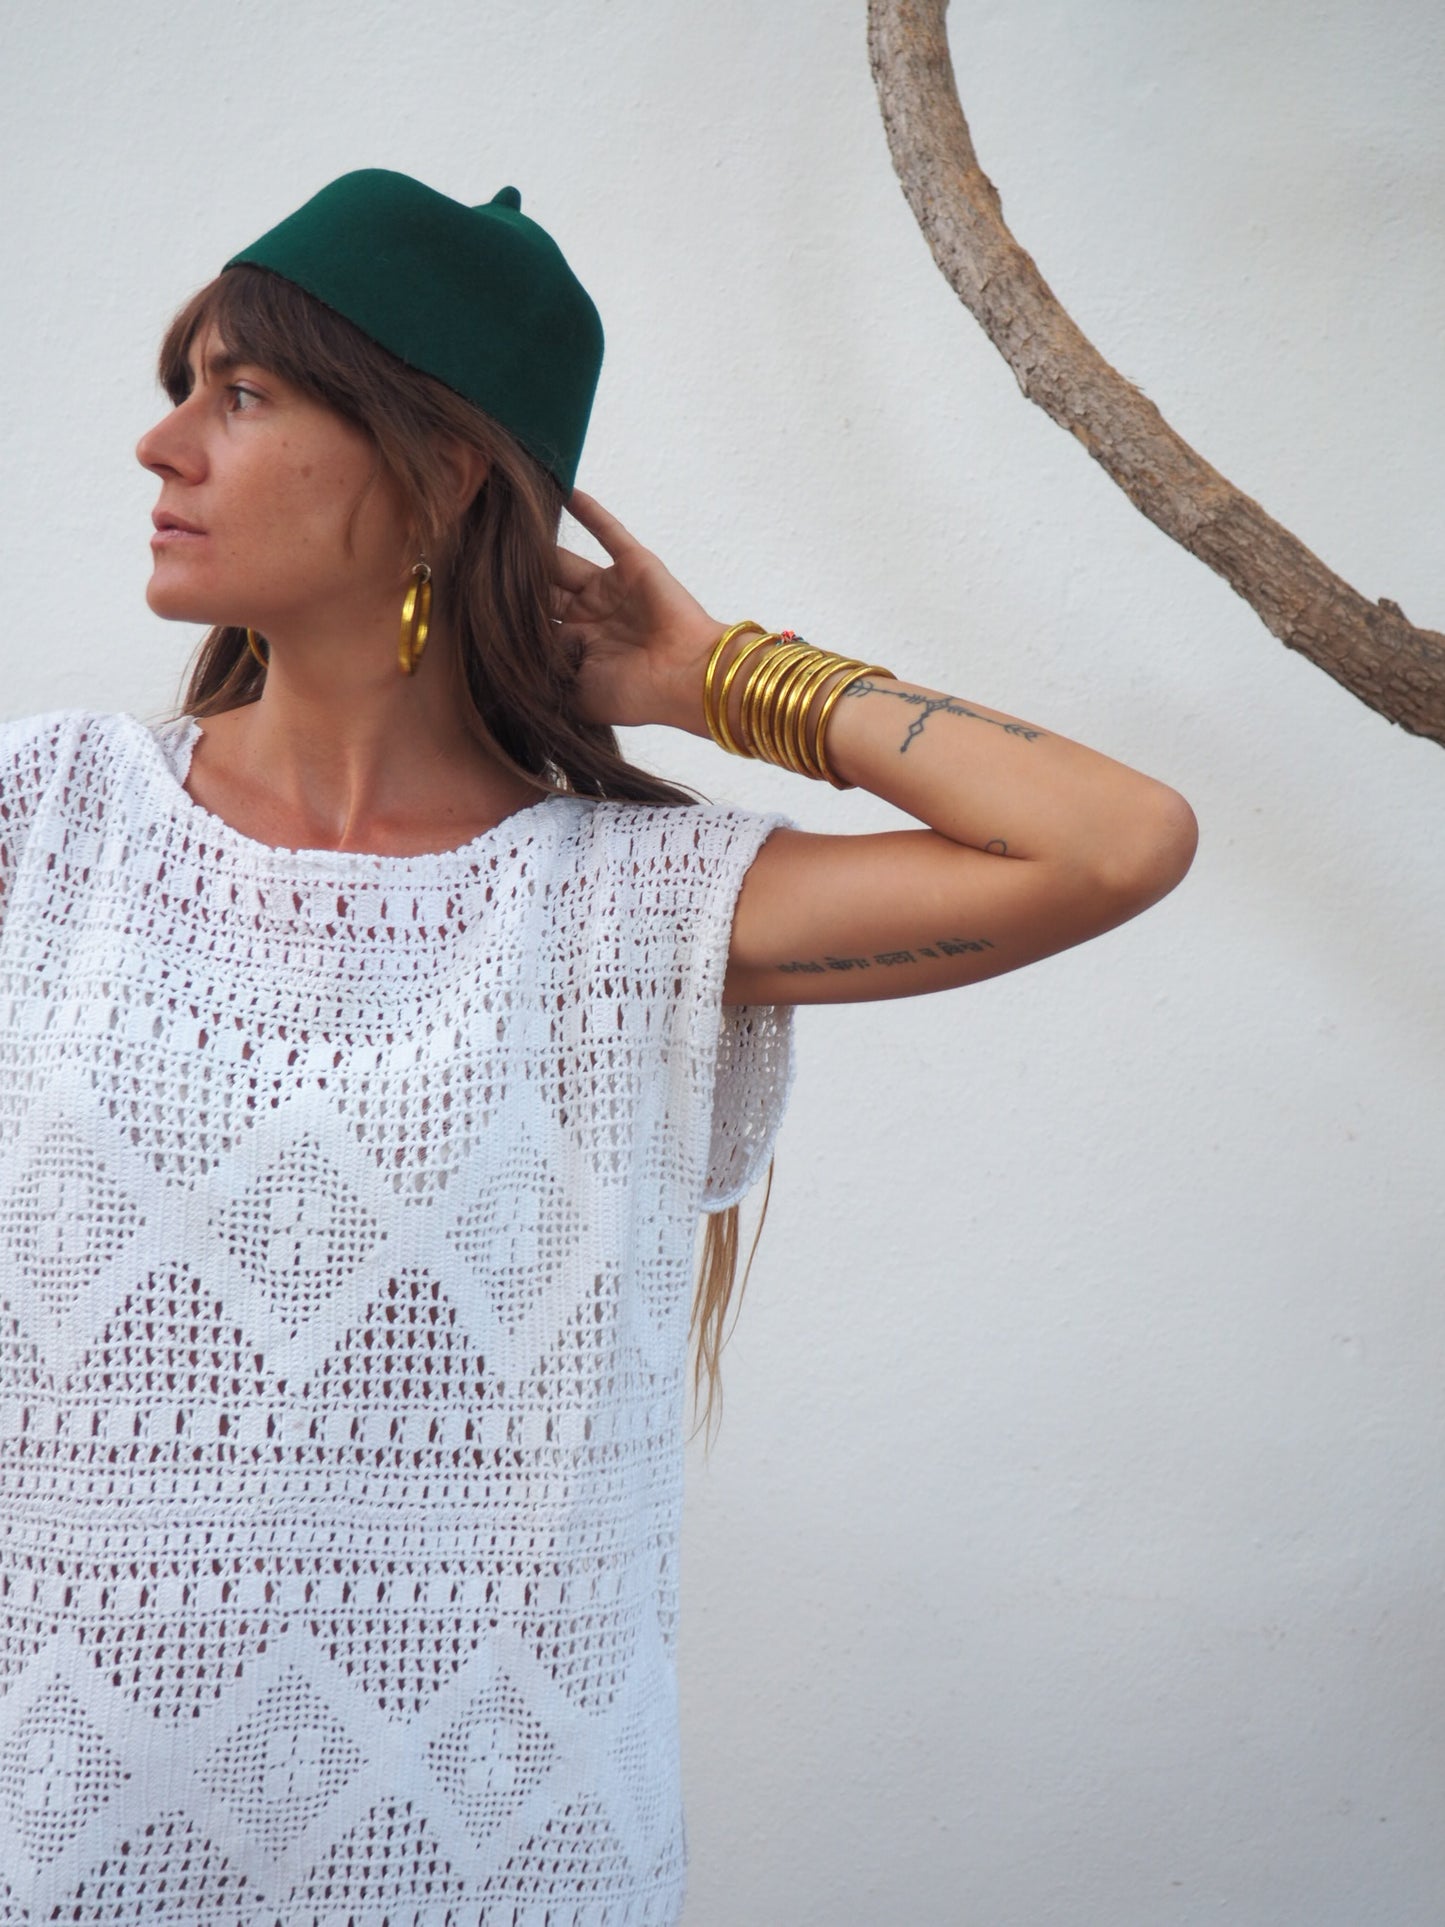 Amazing one off a kind white vintage crochet shirt dress up-cycled by Vagabond Ibiza